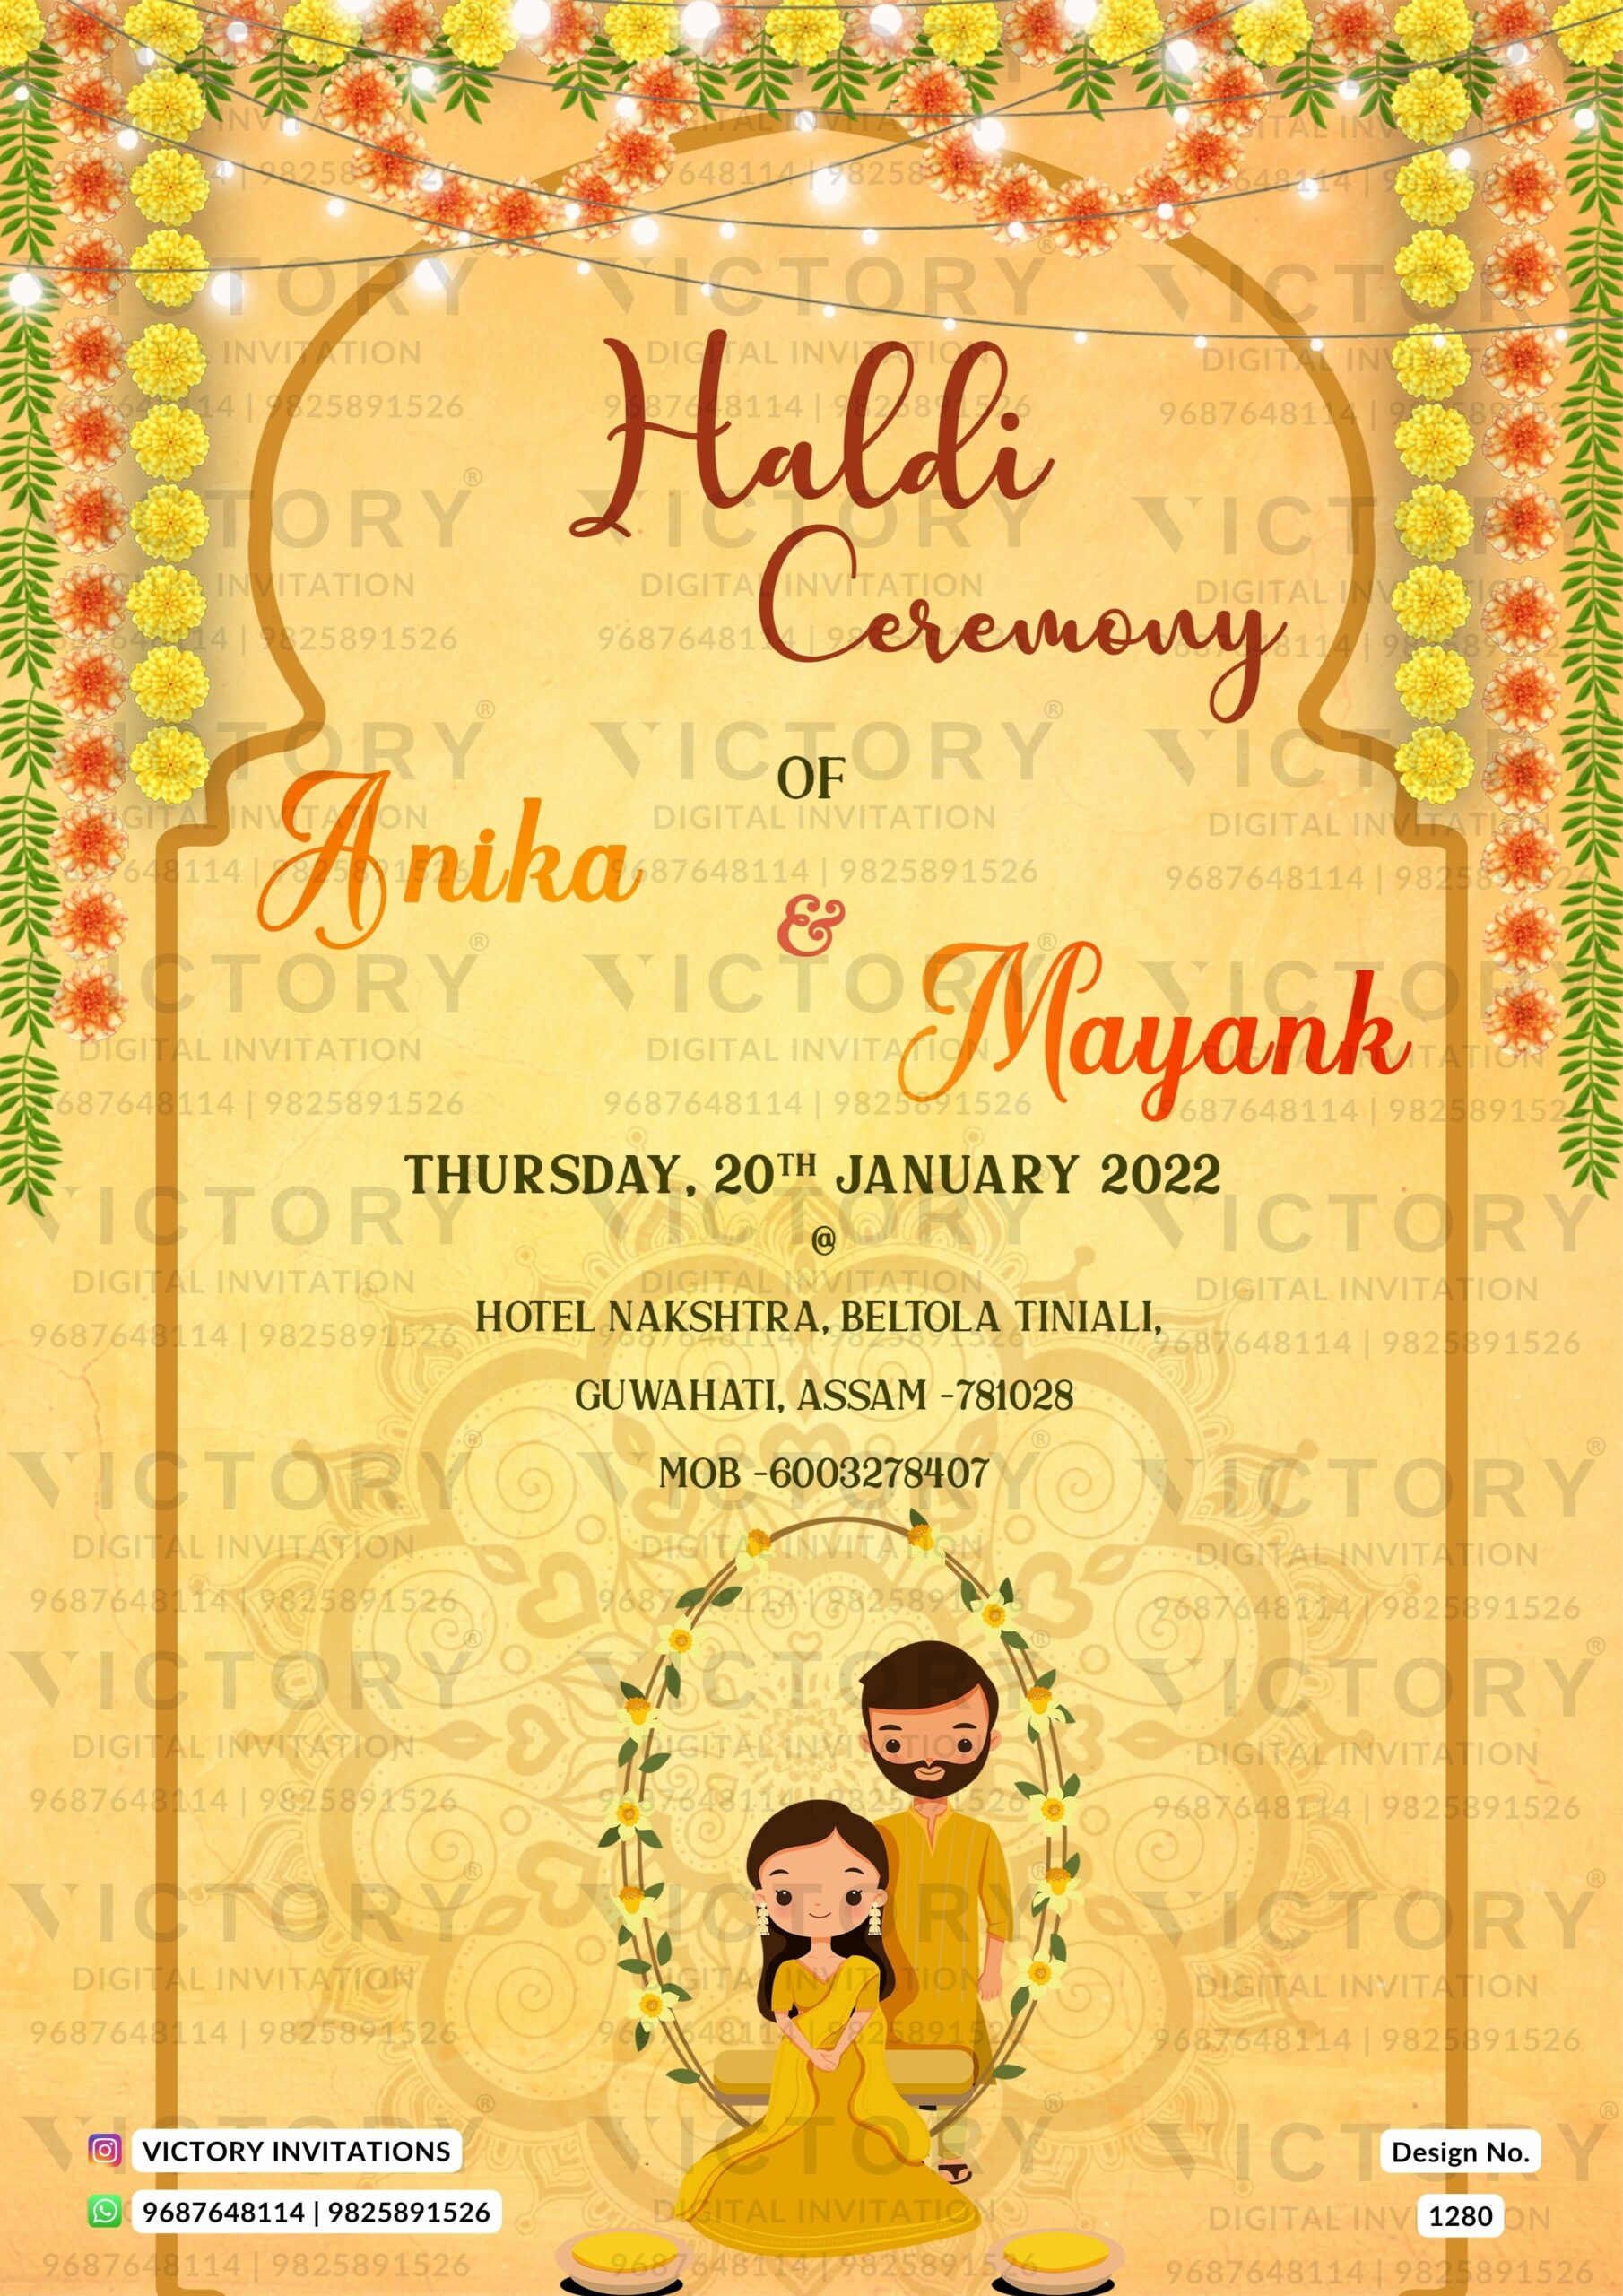 New Golden Yellow Indian Traditional Haldi Ceremony Digital invitation card  with Indian Couple Doodle, design no. 1280 